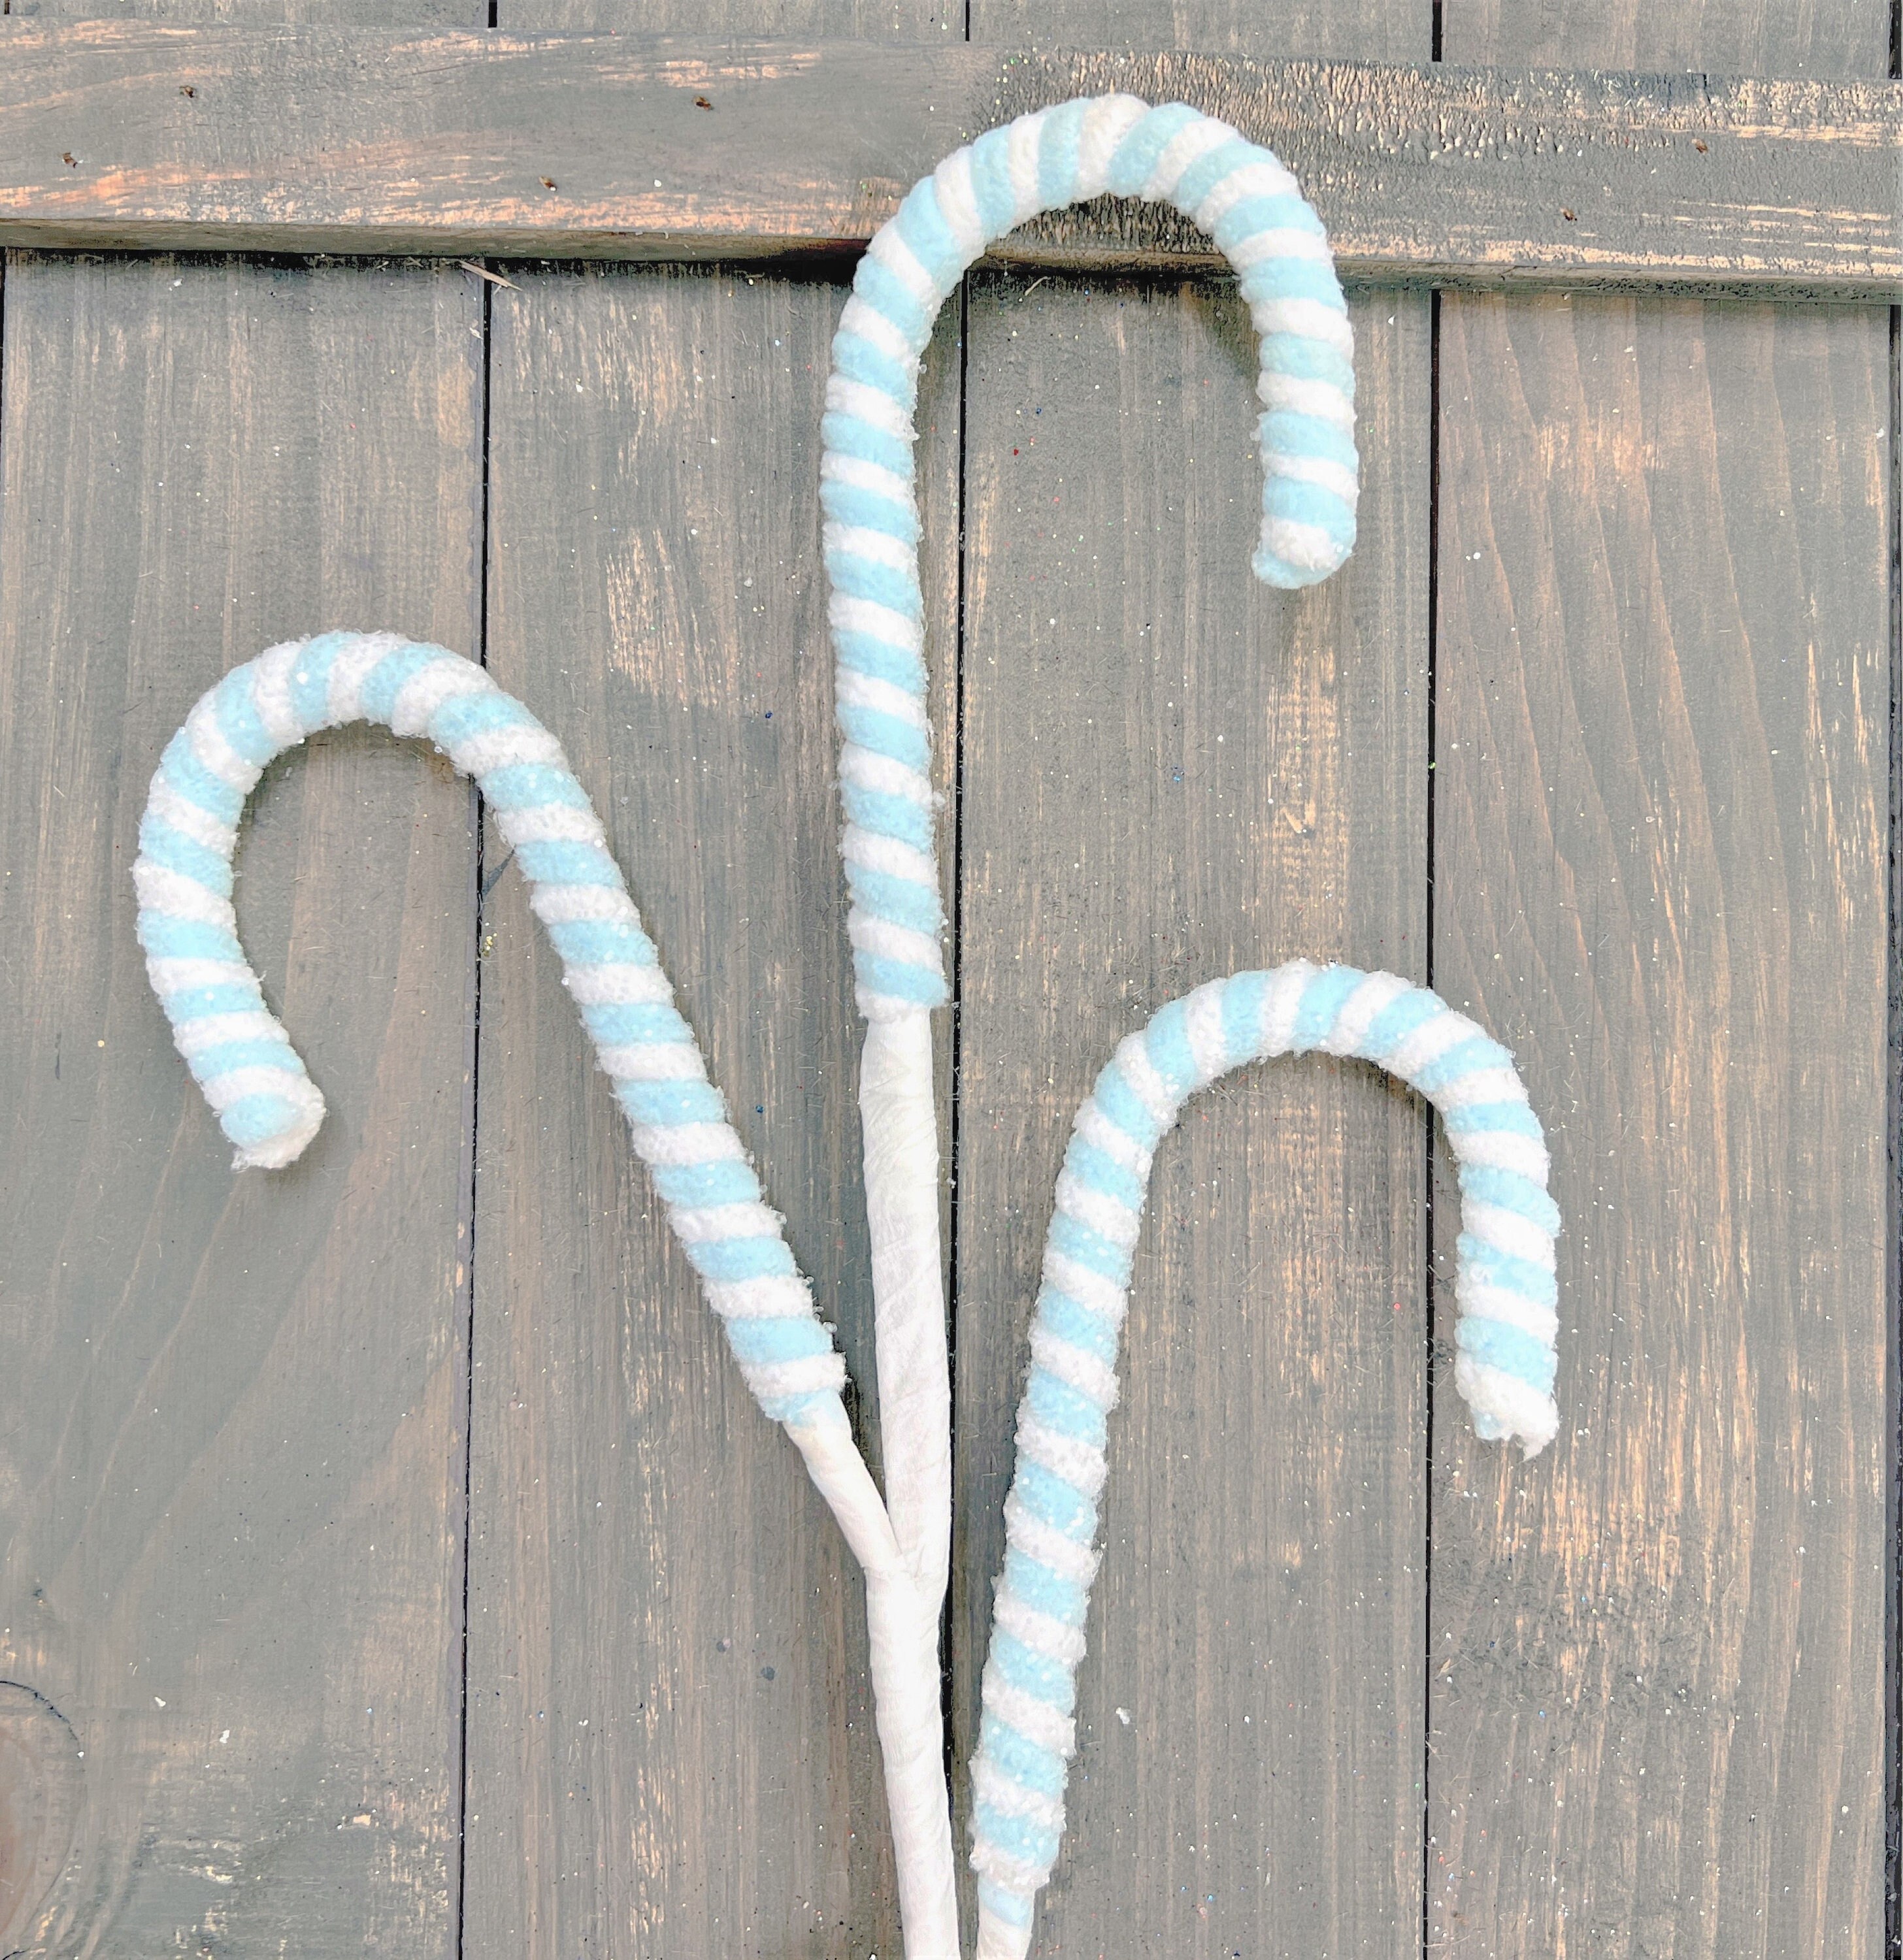 candy cane white and blue bag of 16 pieces Biribao 448 Gr.